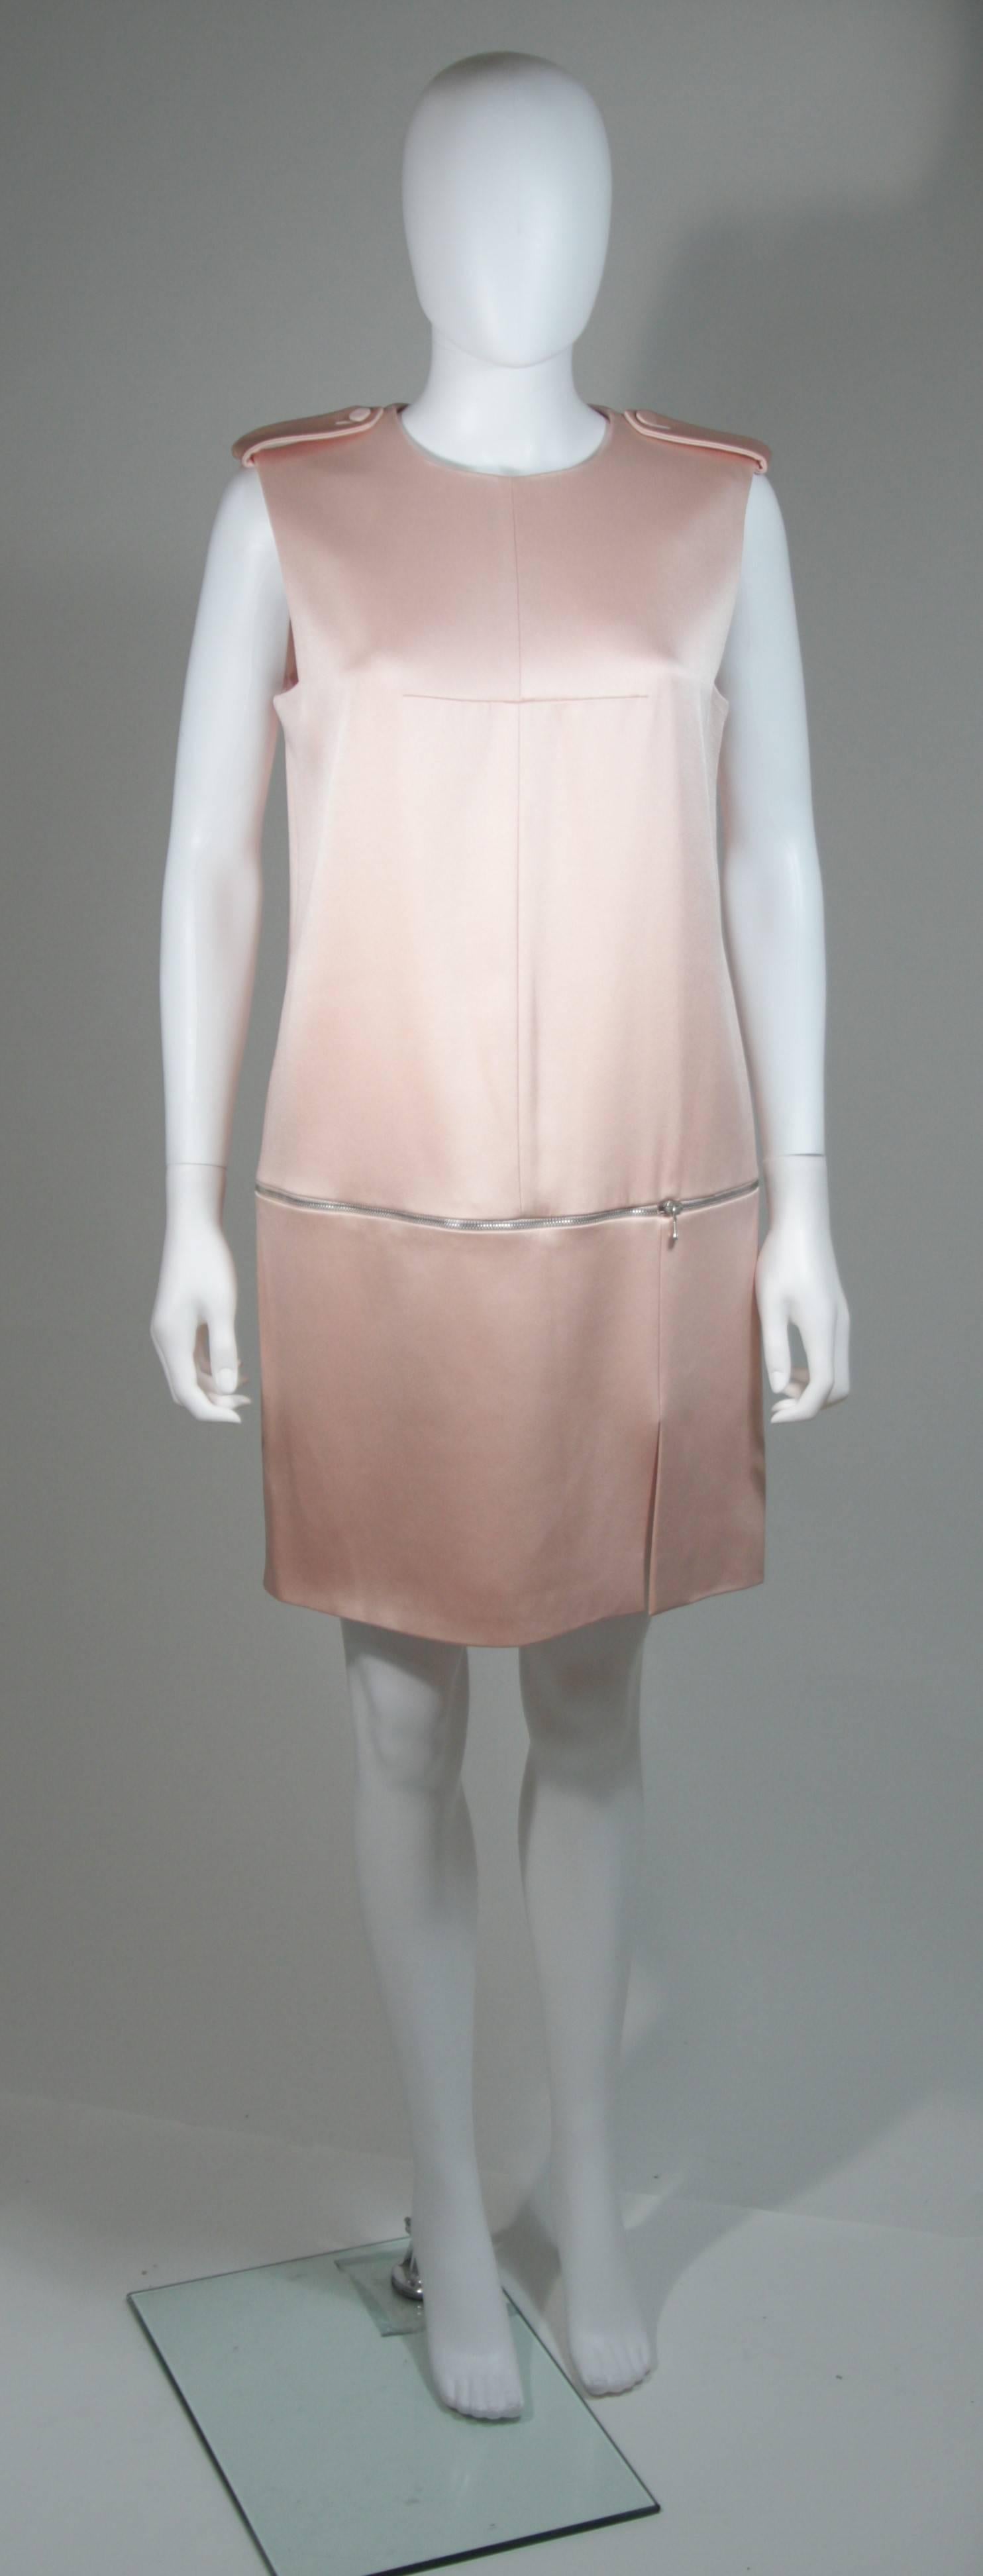 This Alexander McQueen dress is composed of a pink silk. Features a functional zipper detail at the hips and shoulder details. There is a center back zipper closure. In excellent condition, possibly unworn. 

**Please cross-reference measurements